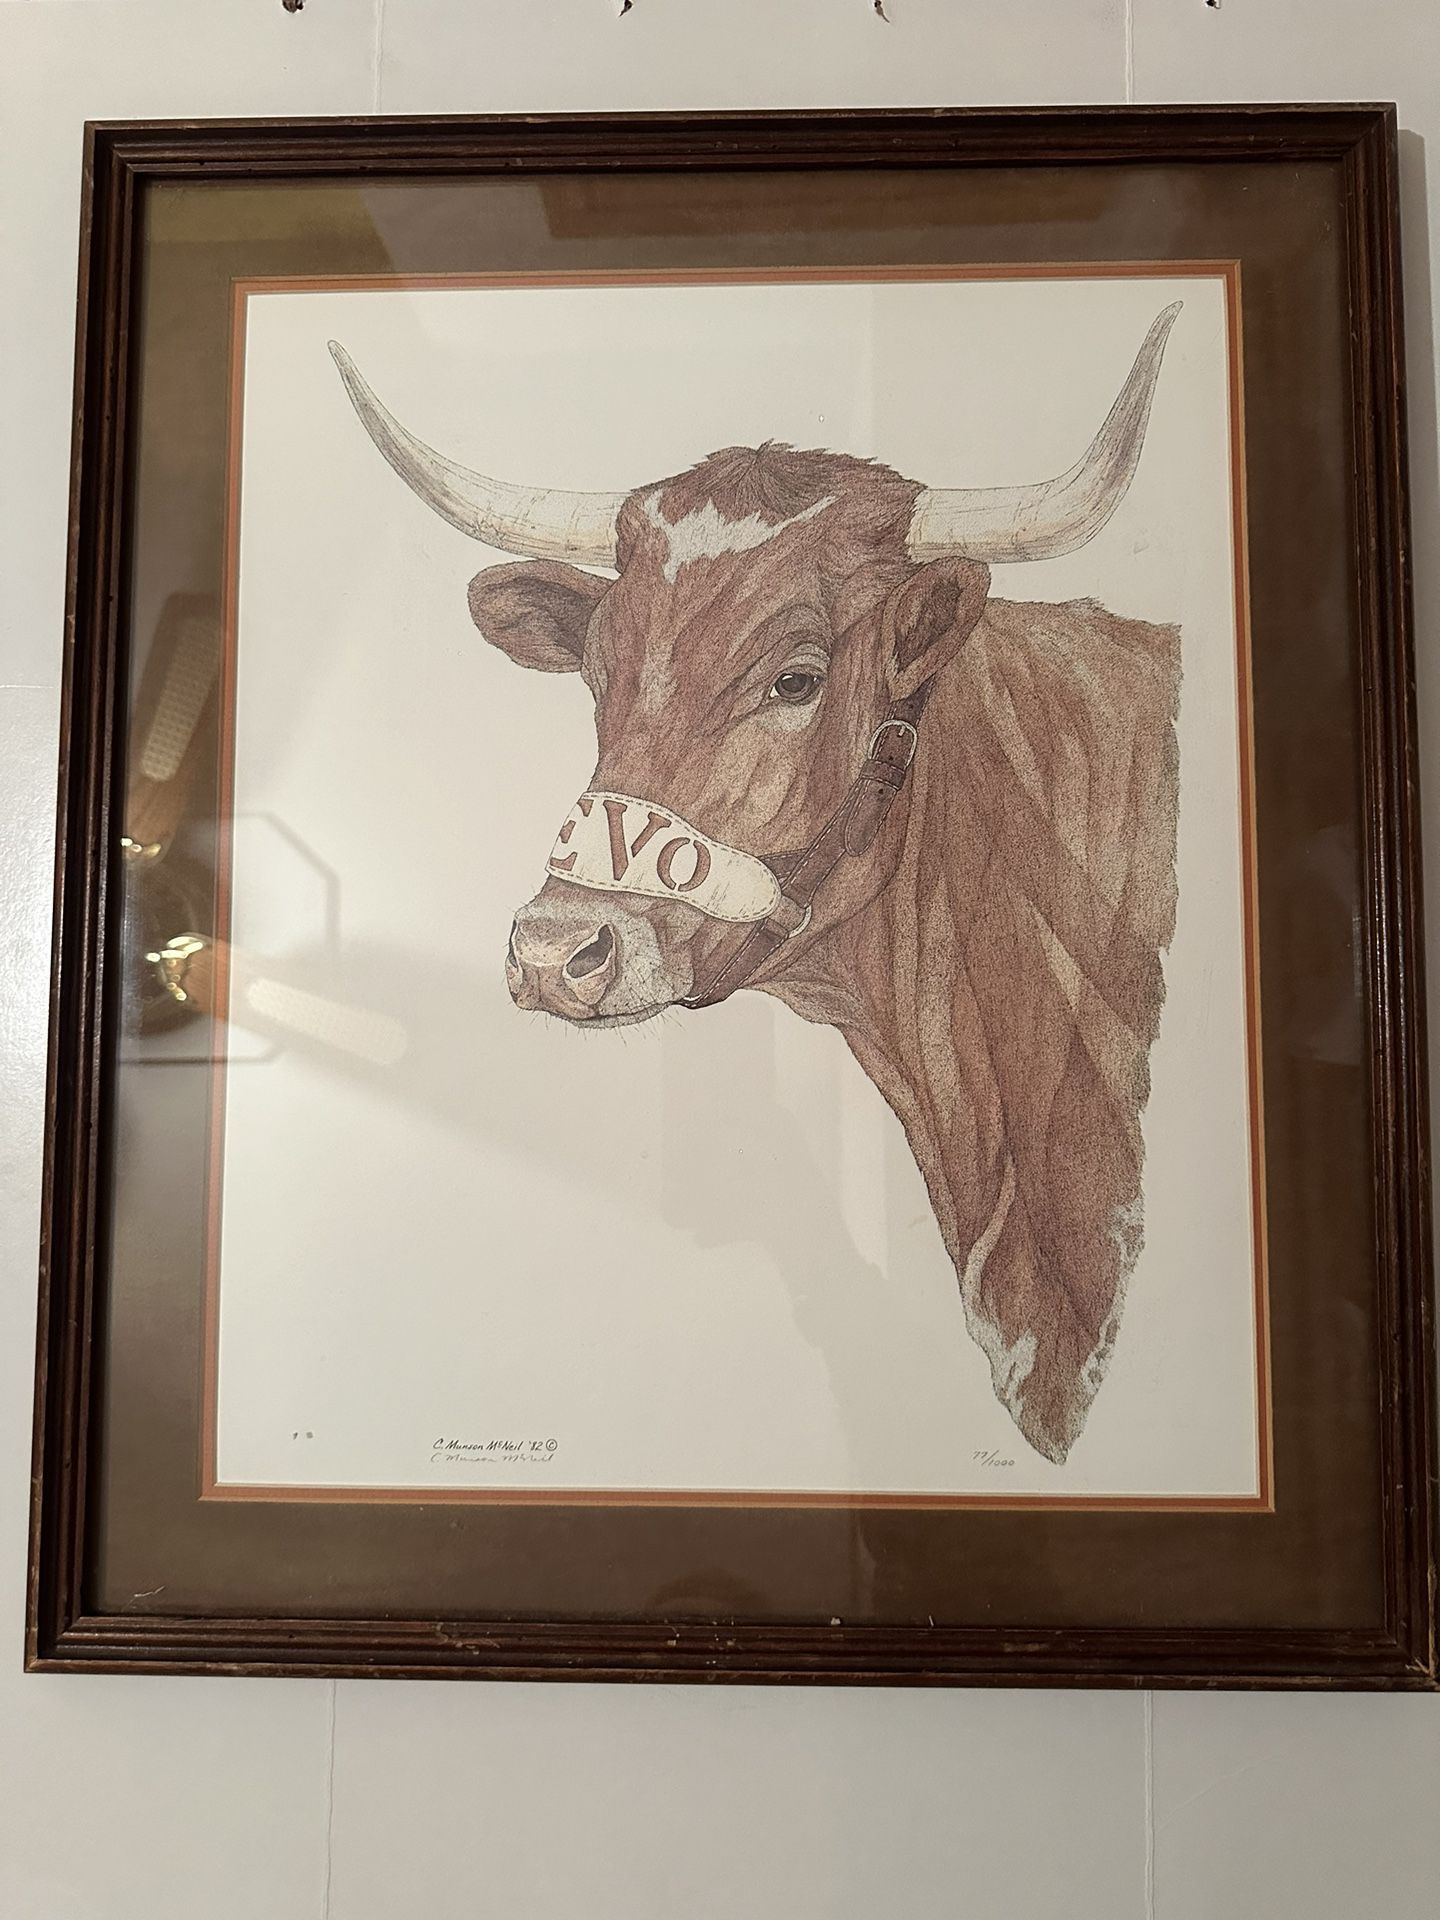 BEVO Cathy Munson McNeil 1982 Pencil, Ink Watercolor Painting Texas Longhorn